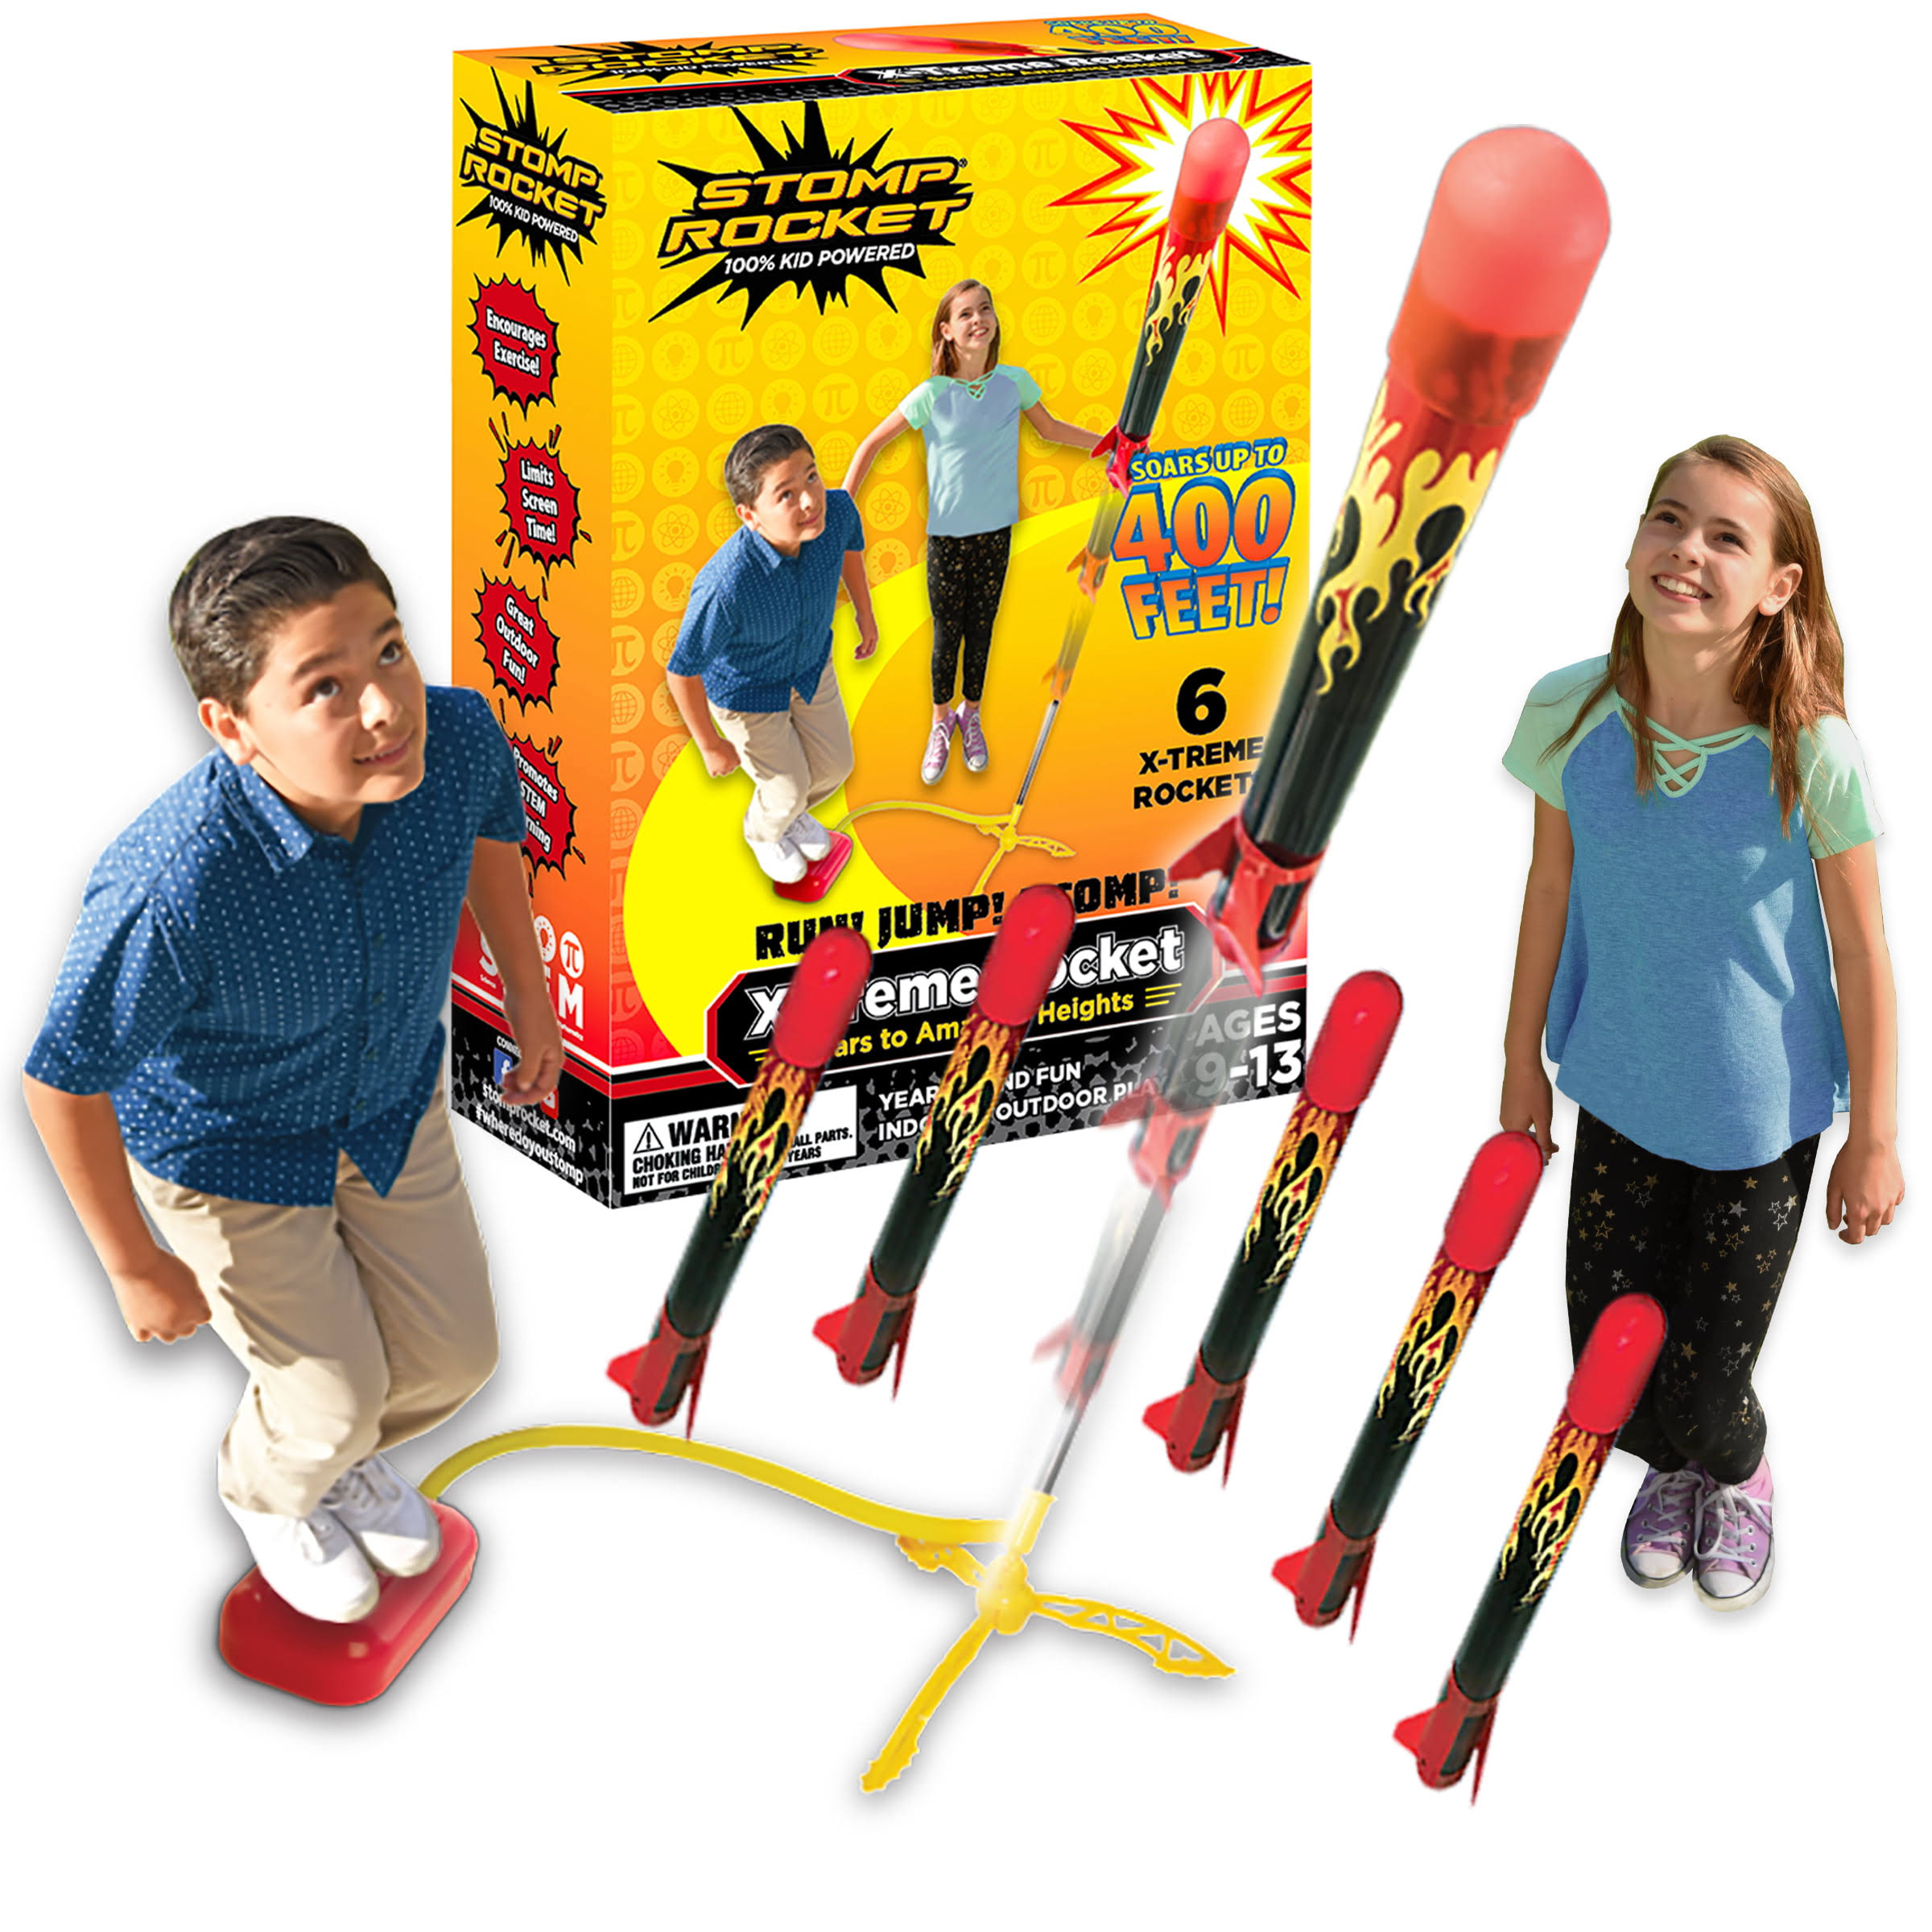 Stomp Rocket Extreme Super High Flying Rocket Set - with Launch Pad